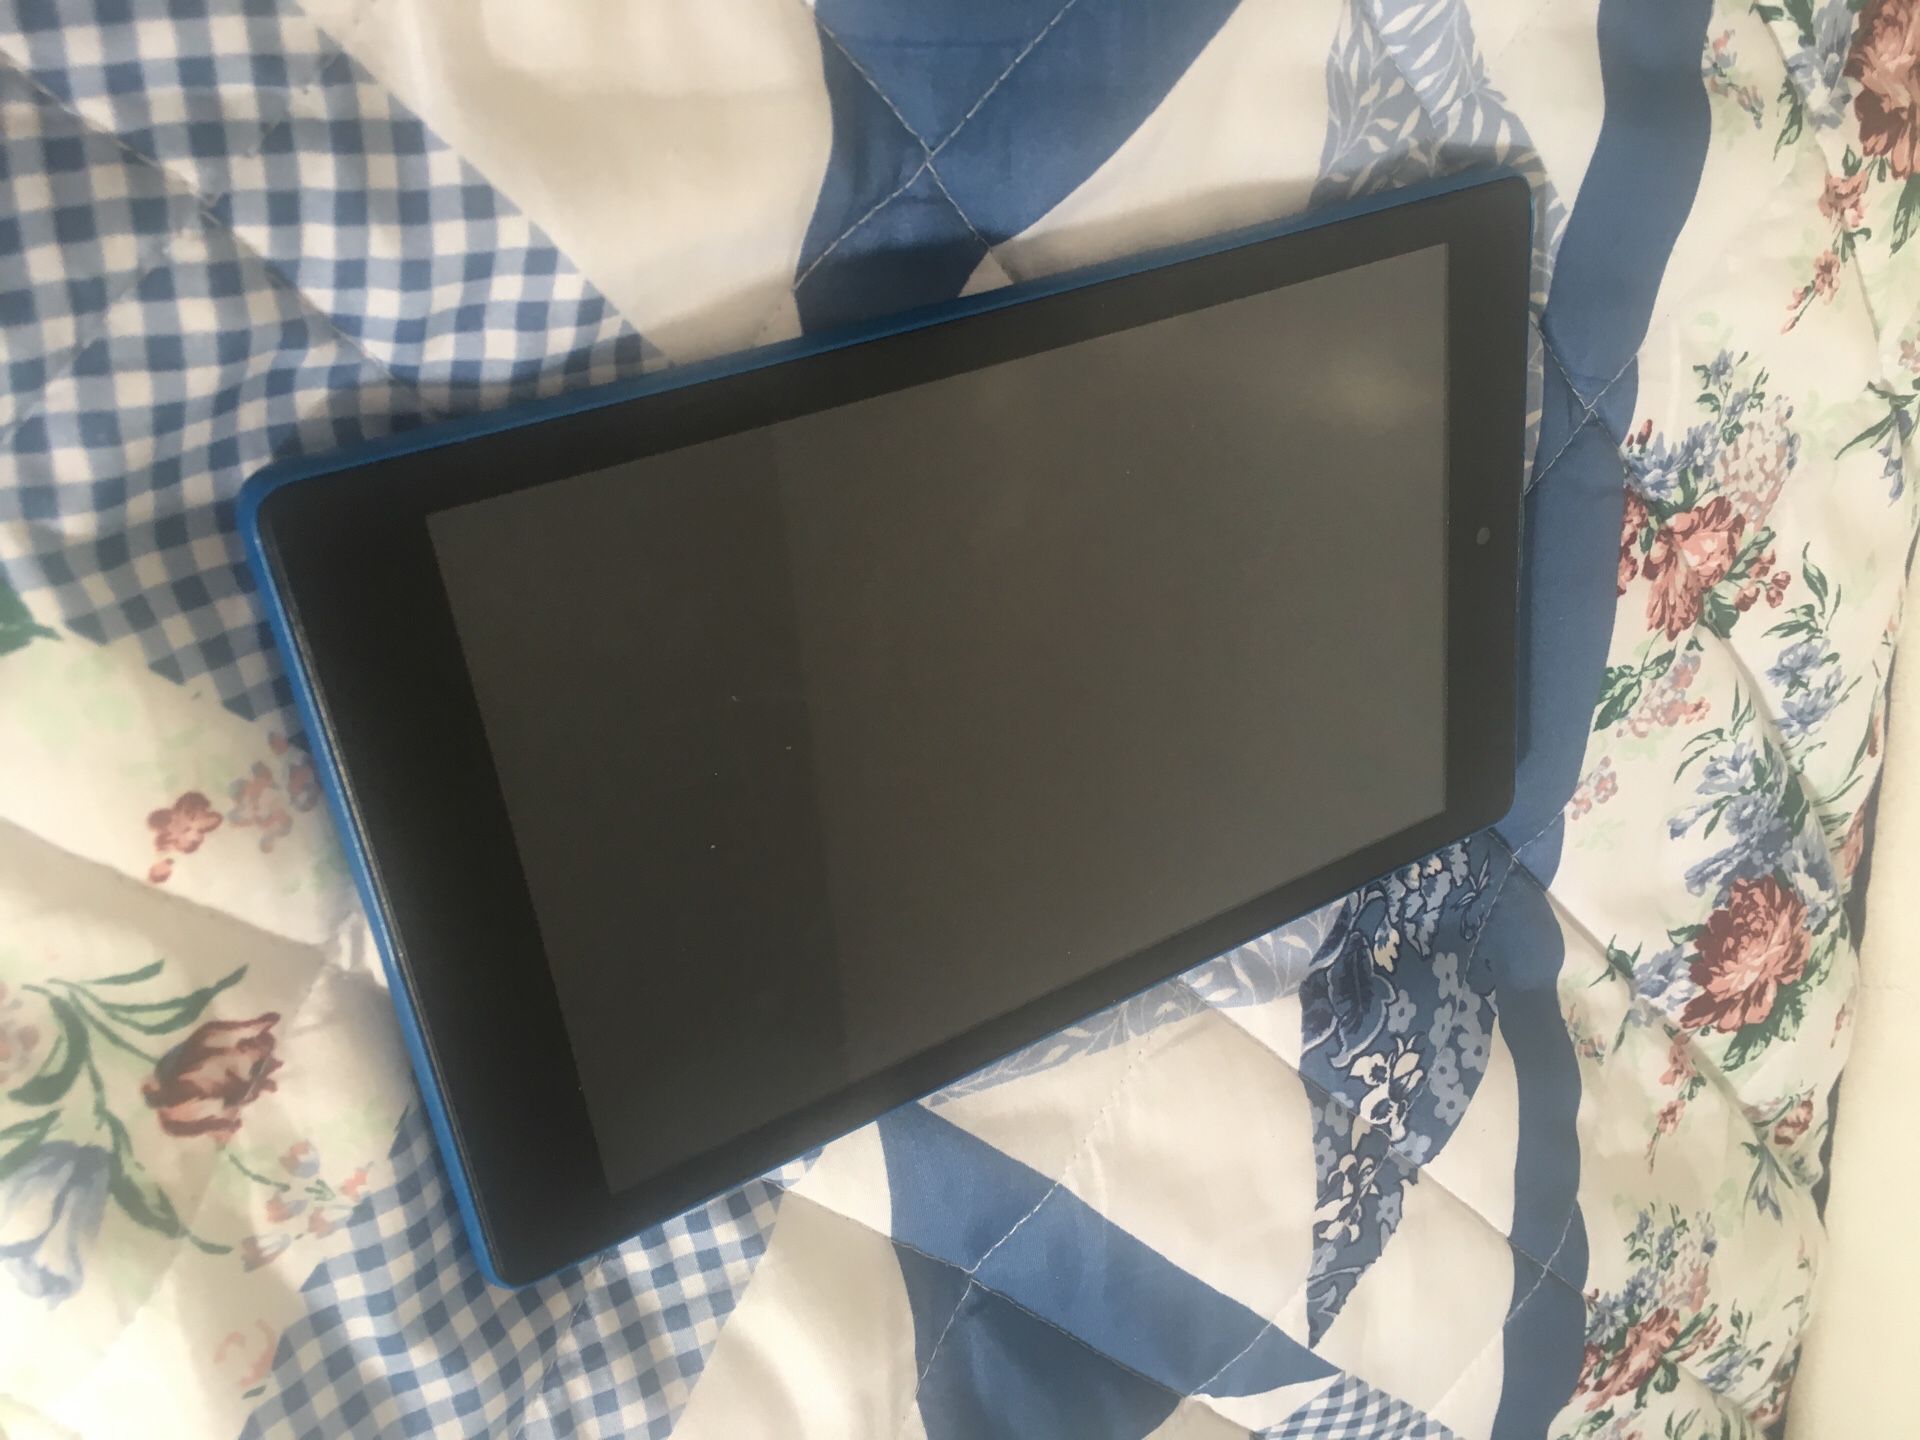 Amazon Fire Tablet (Blue Edition)